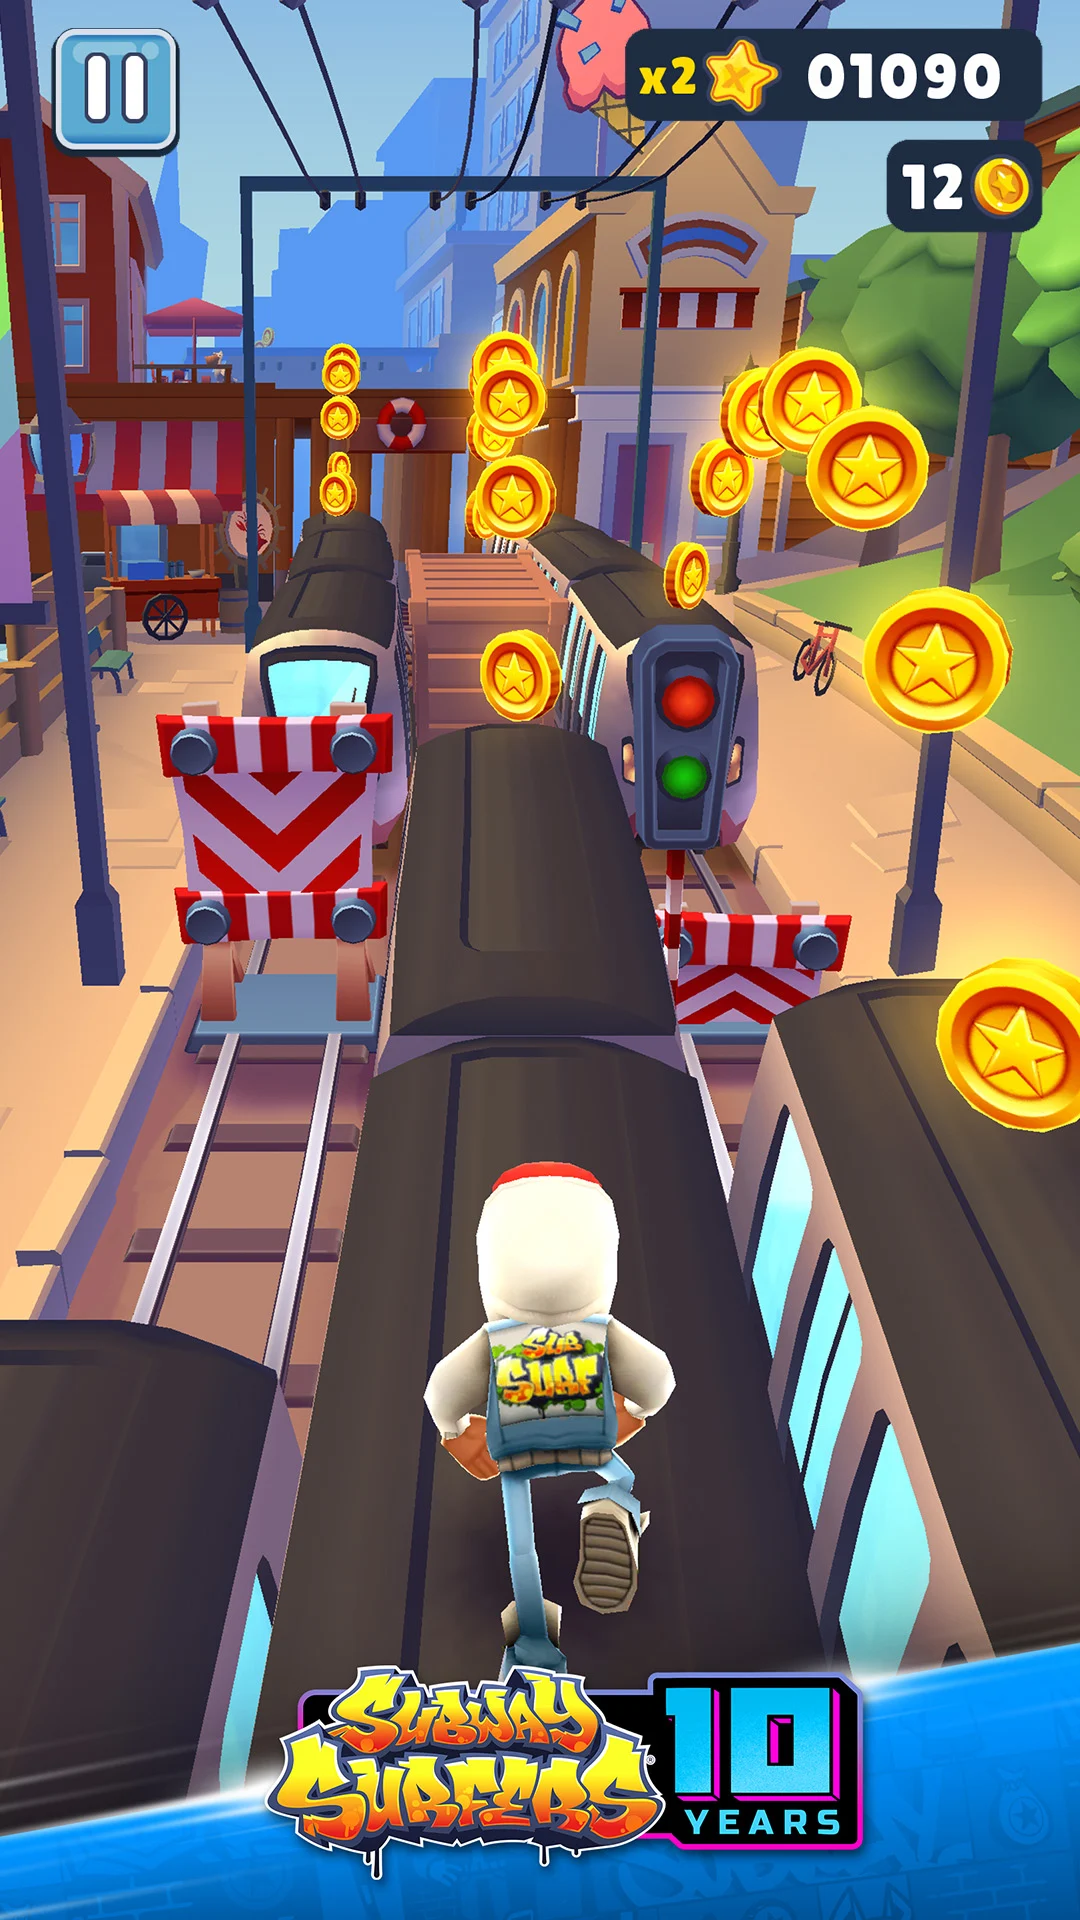 Download Subway Surfers 2.35.0 APK for Android